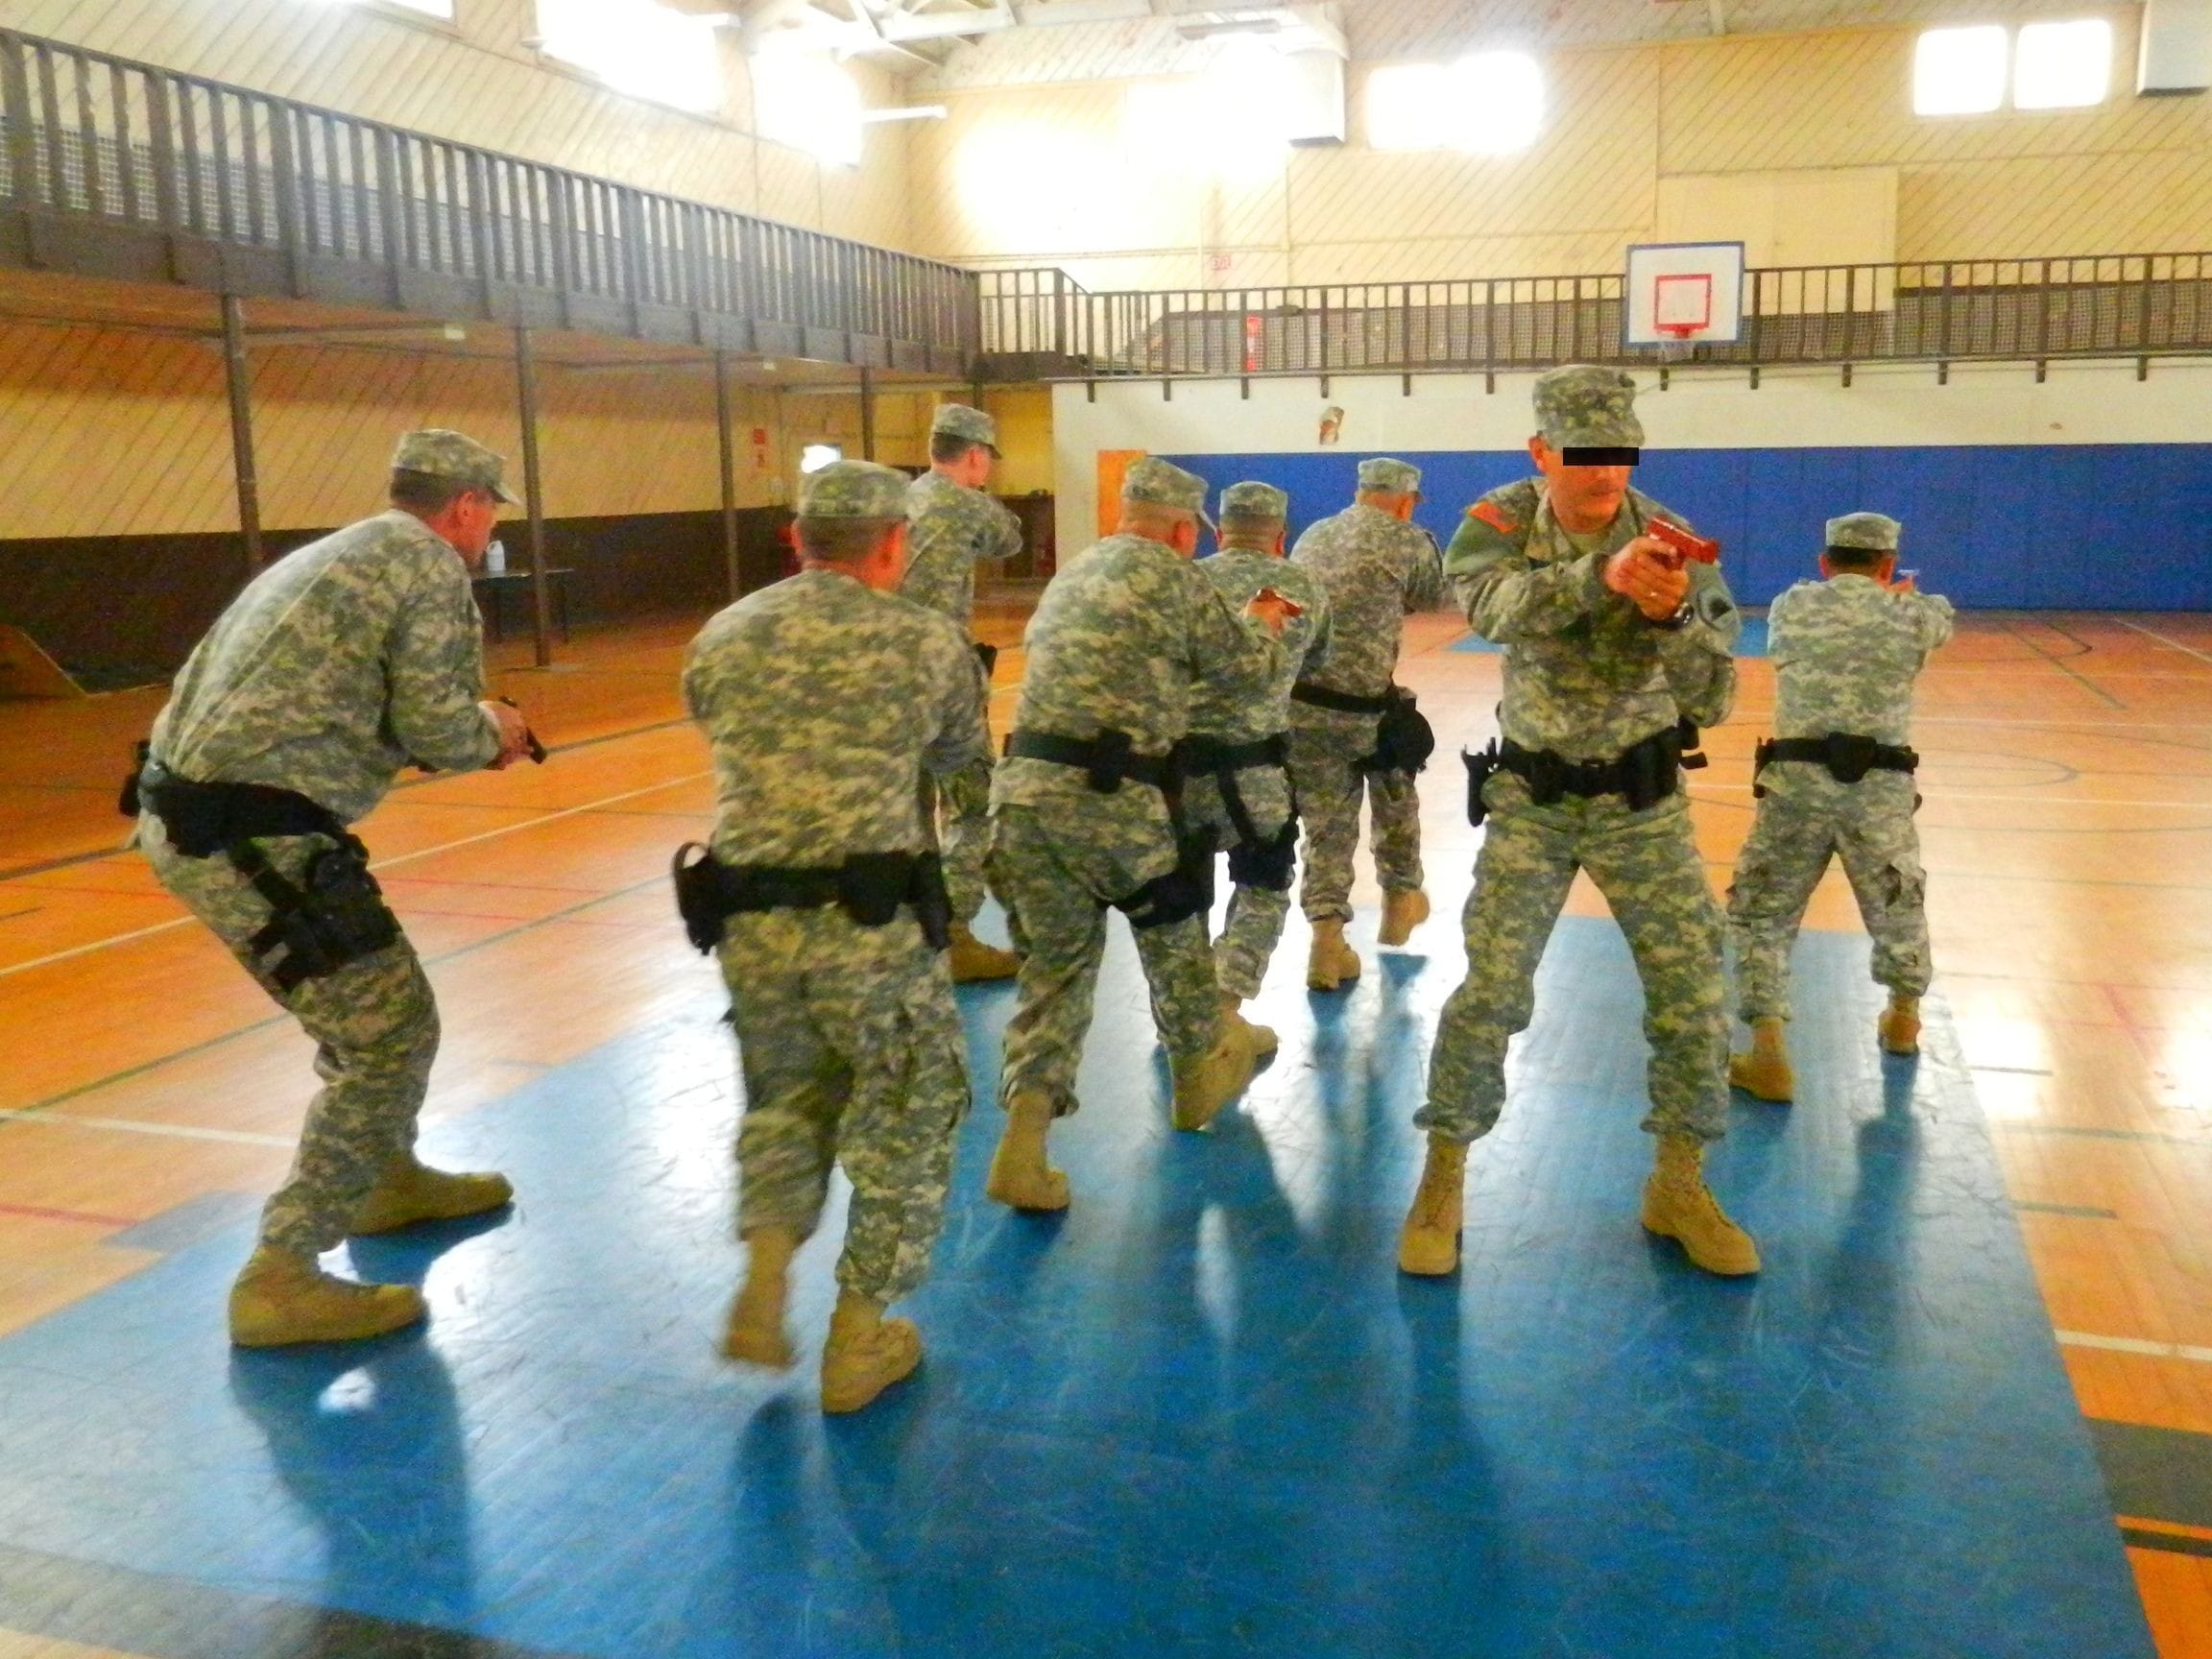 Sergeant First Class Wagner has his soldiers practicing Active Shooter response formations, which was also training for the two schools on the military base.